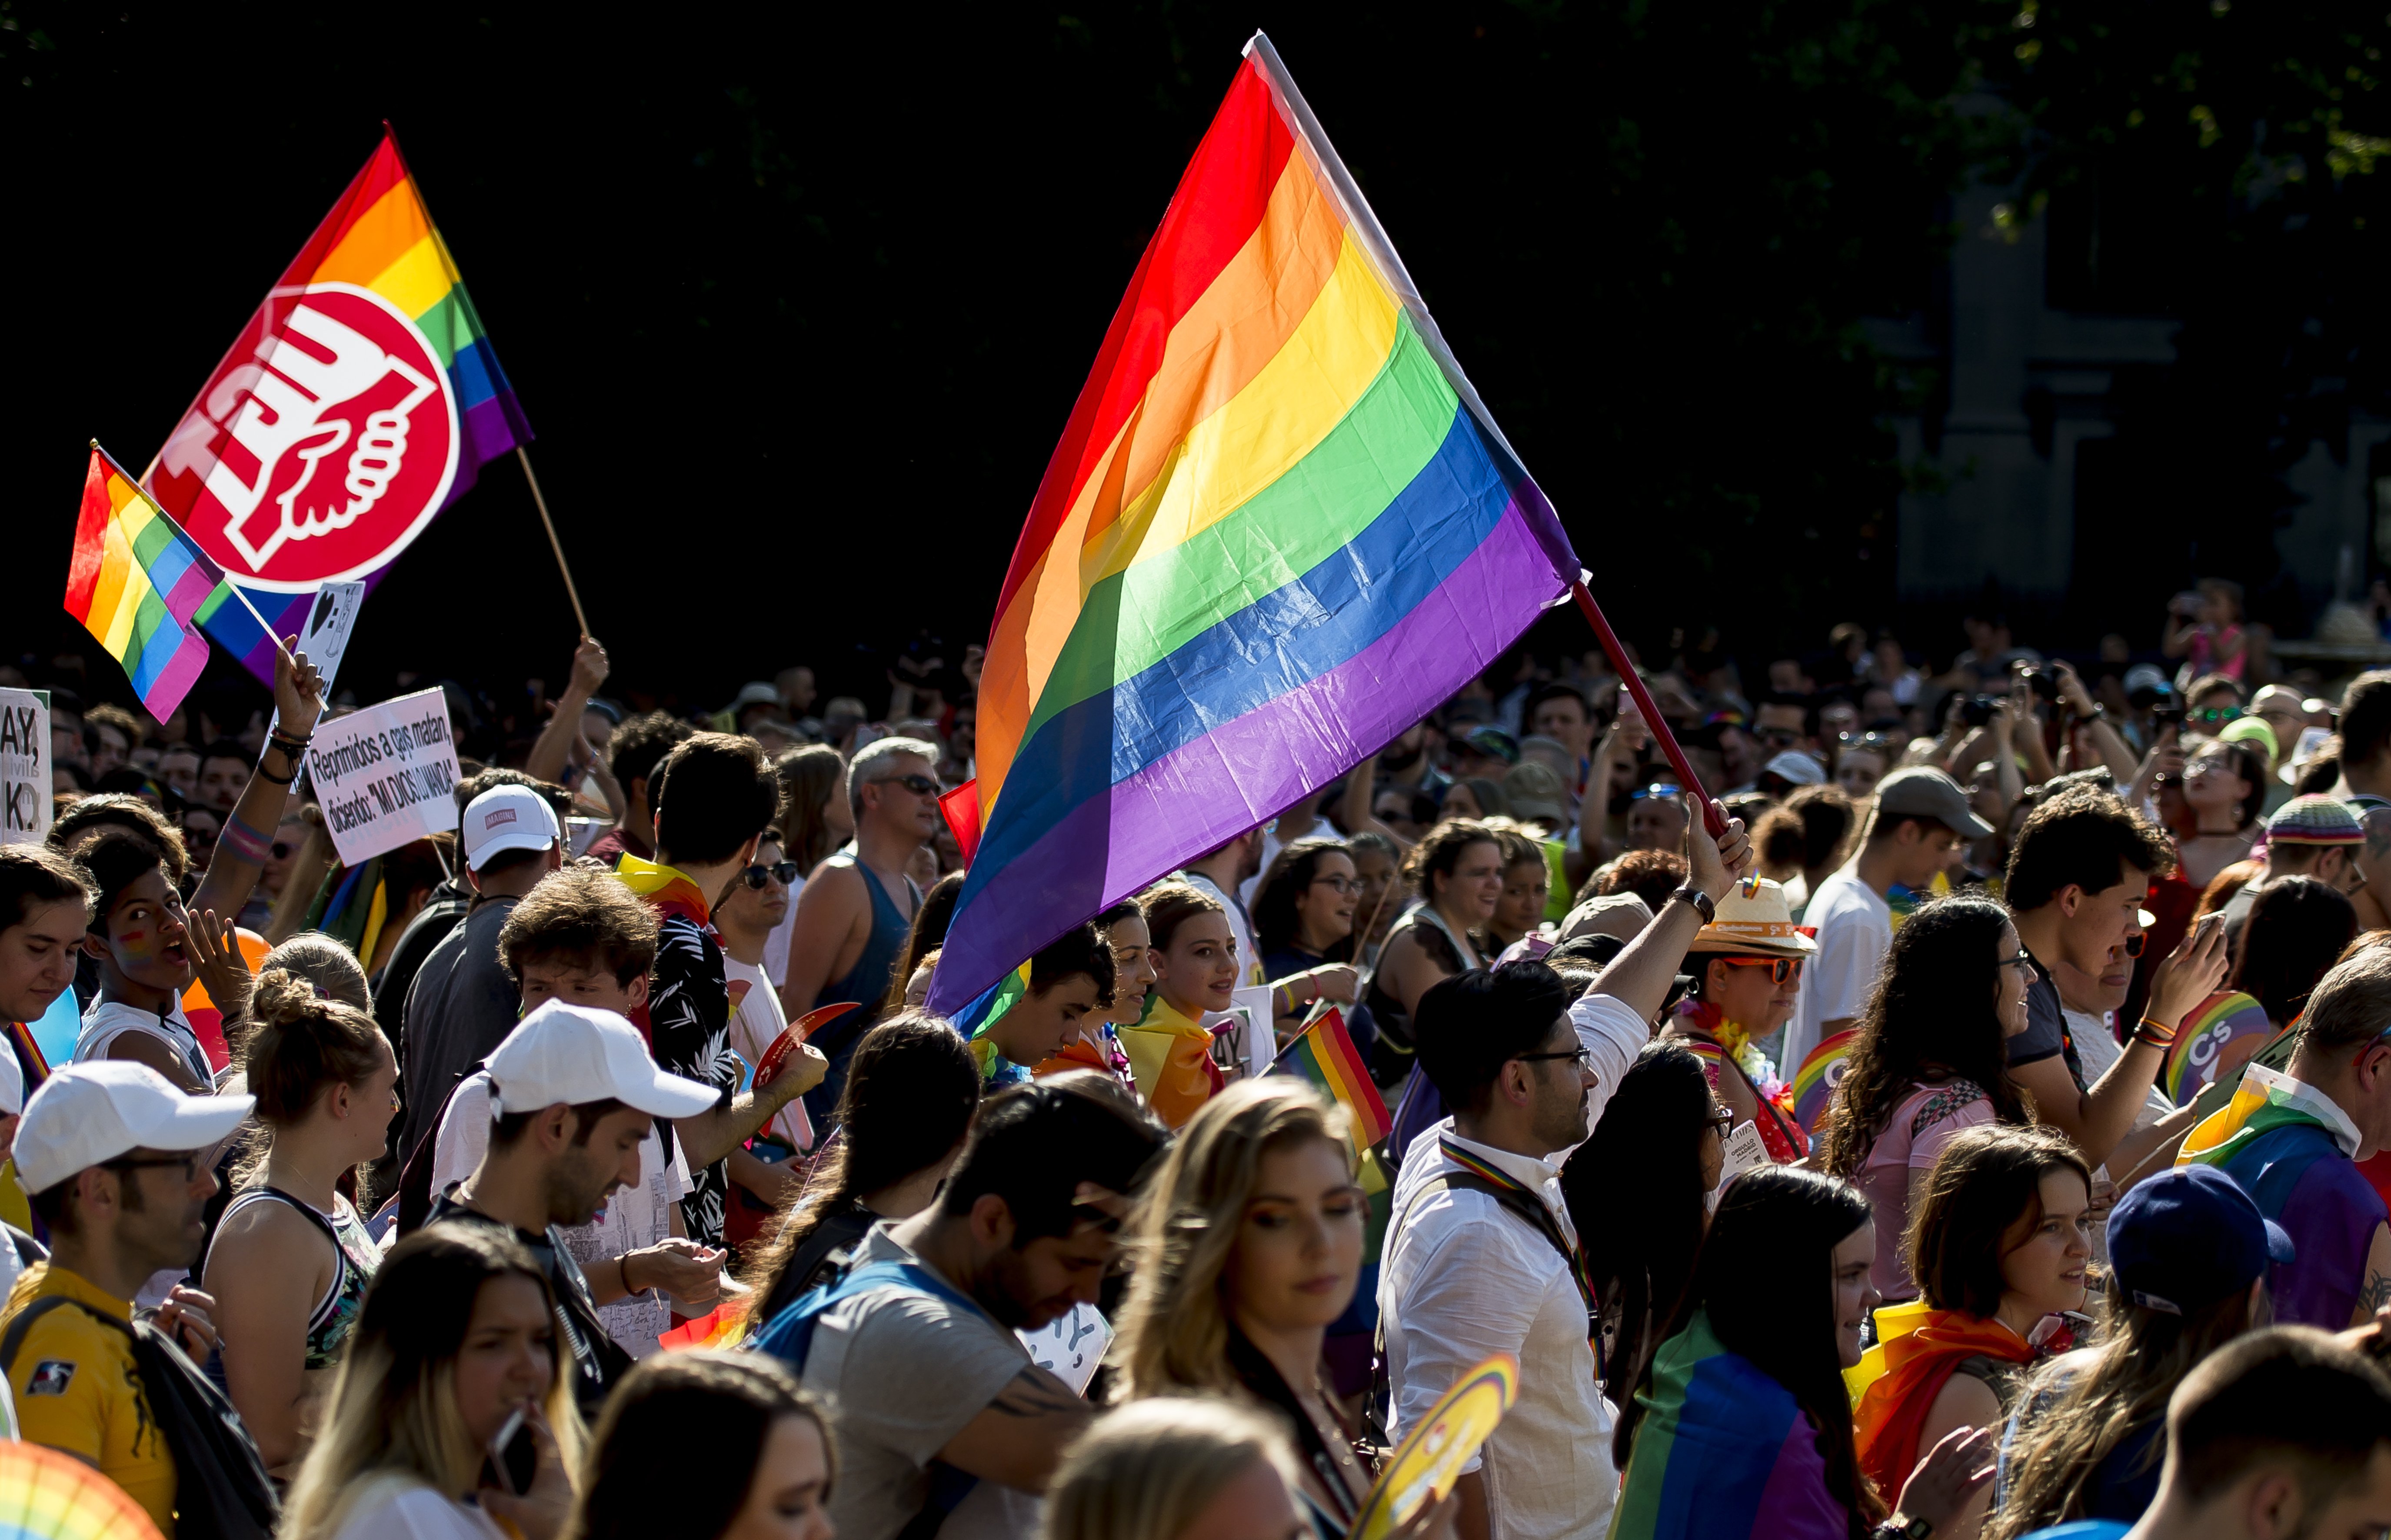 Thousands of LGBTQ members and supporters at the 2018 Gay and Lesbian Pride parade in Madrid, Spain | Photo: Getty Images